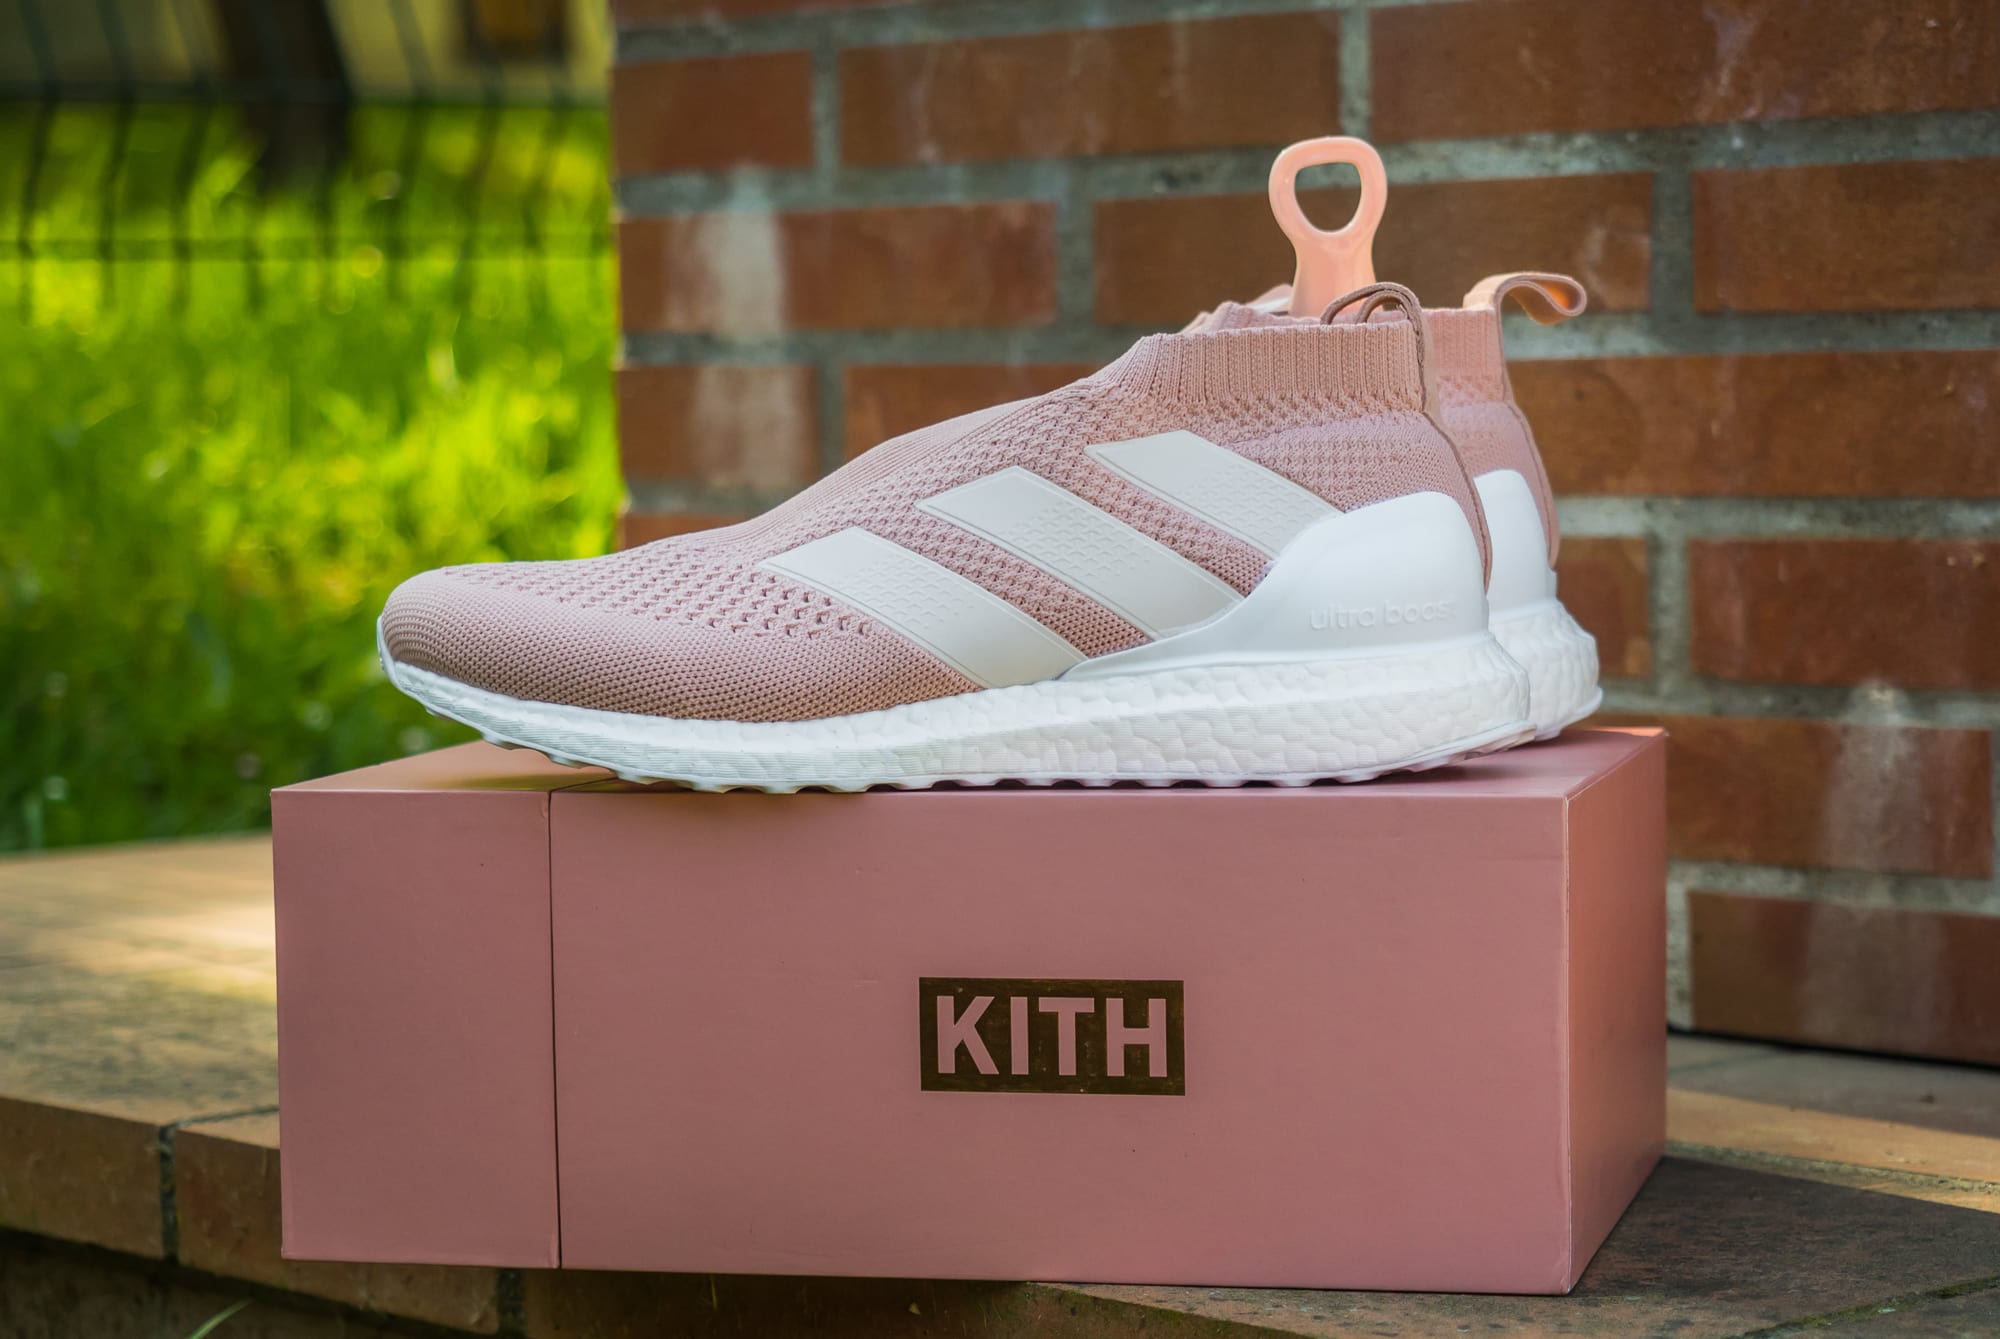 Adidas and Kith reveal plans a flamingo soccer capsule